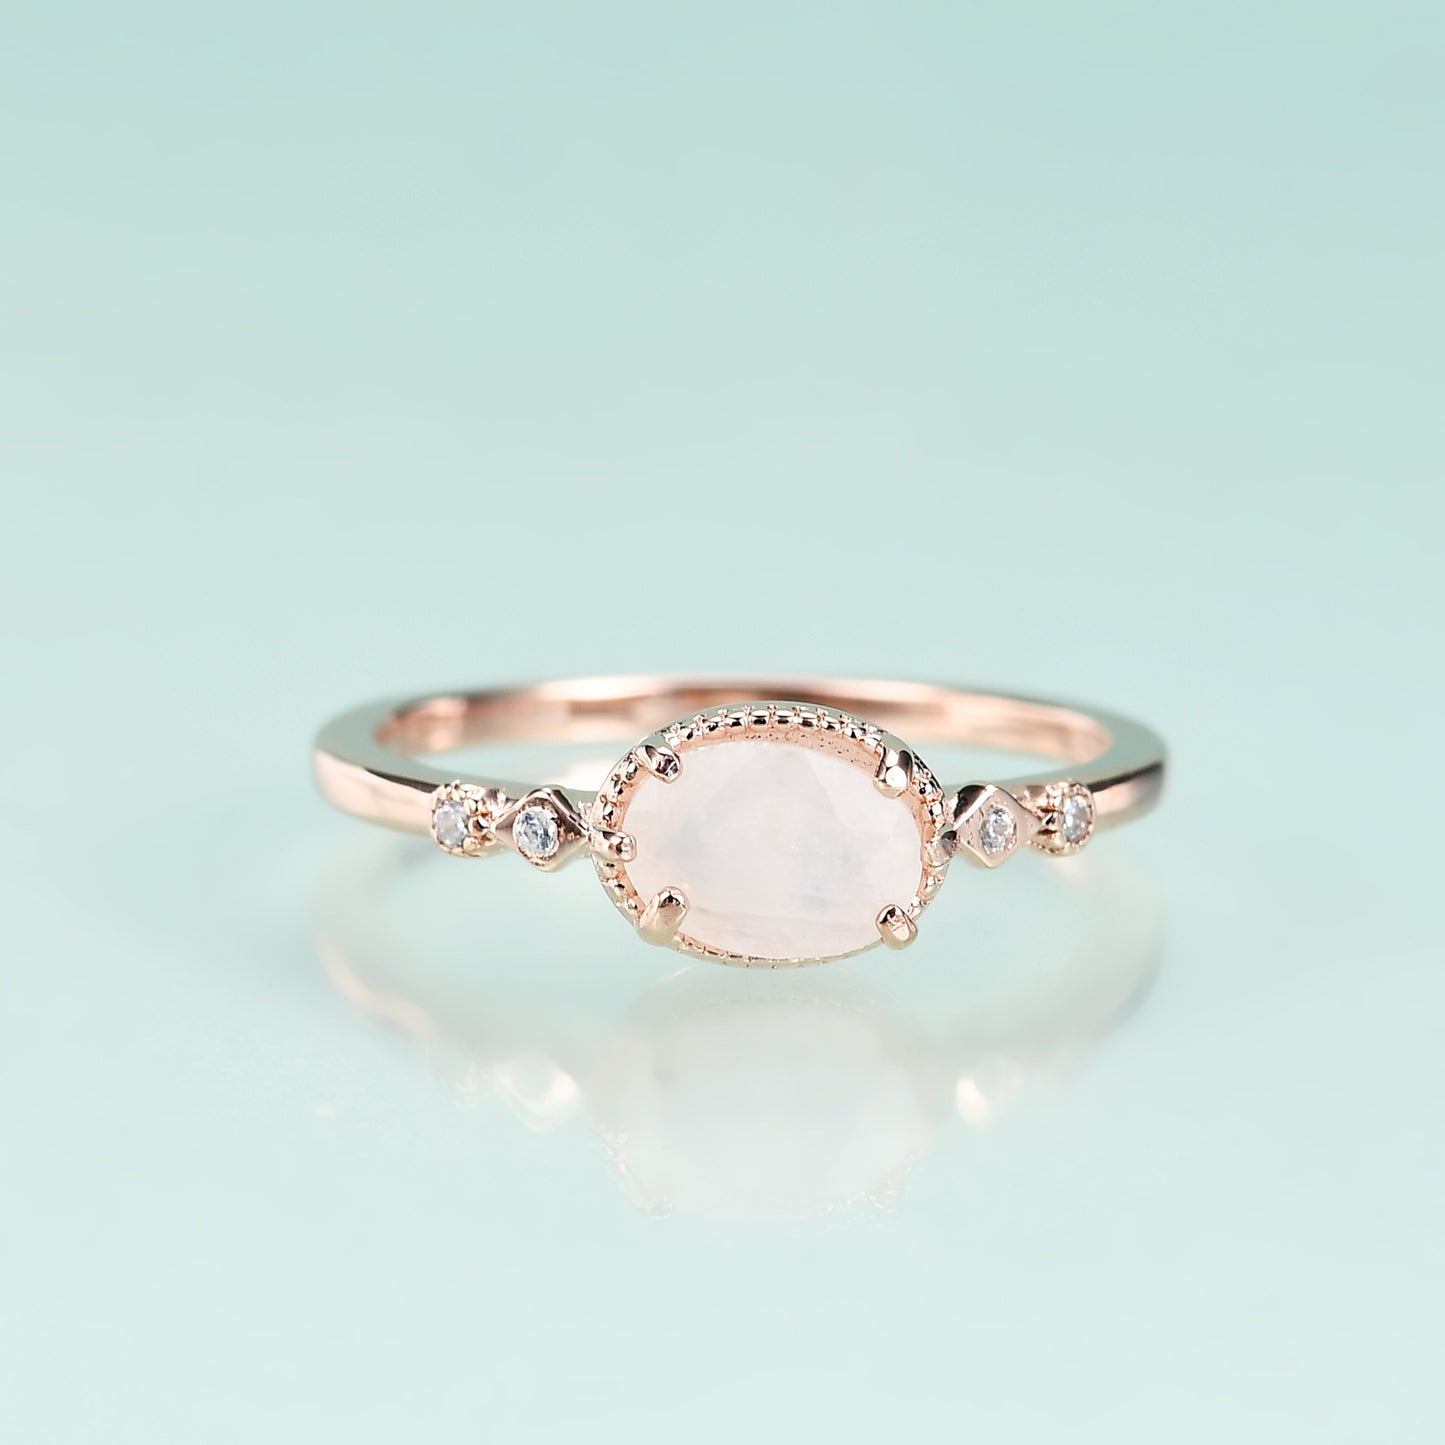 Stylish Oval Natural Moonstone Silver Ring